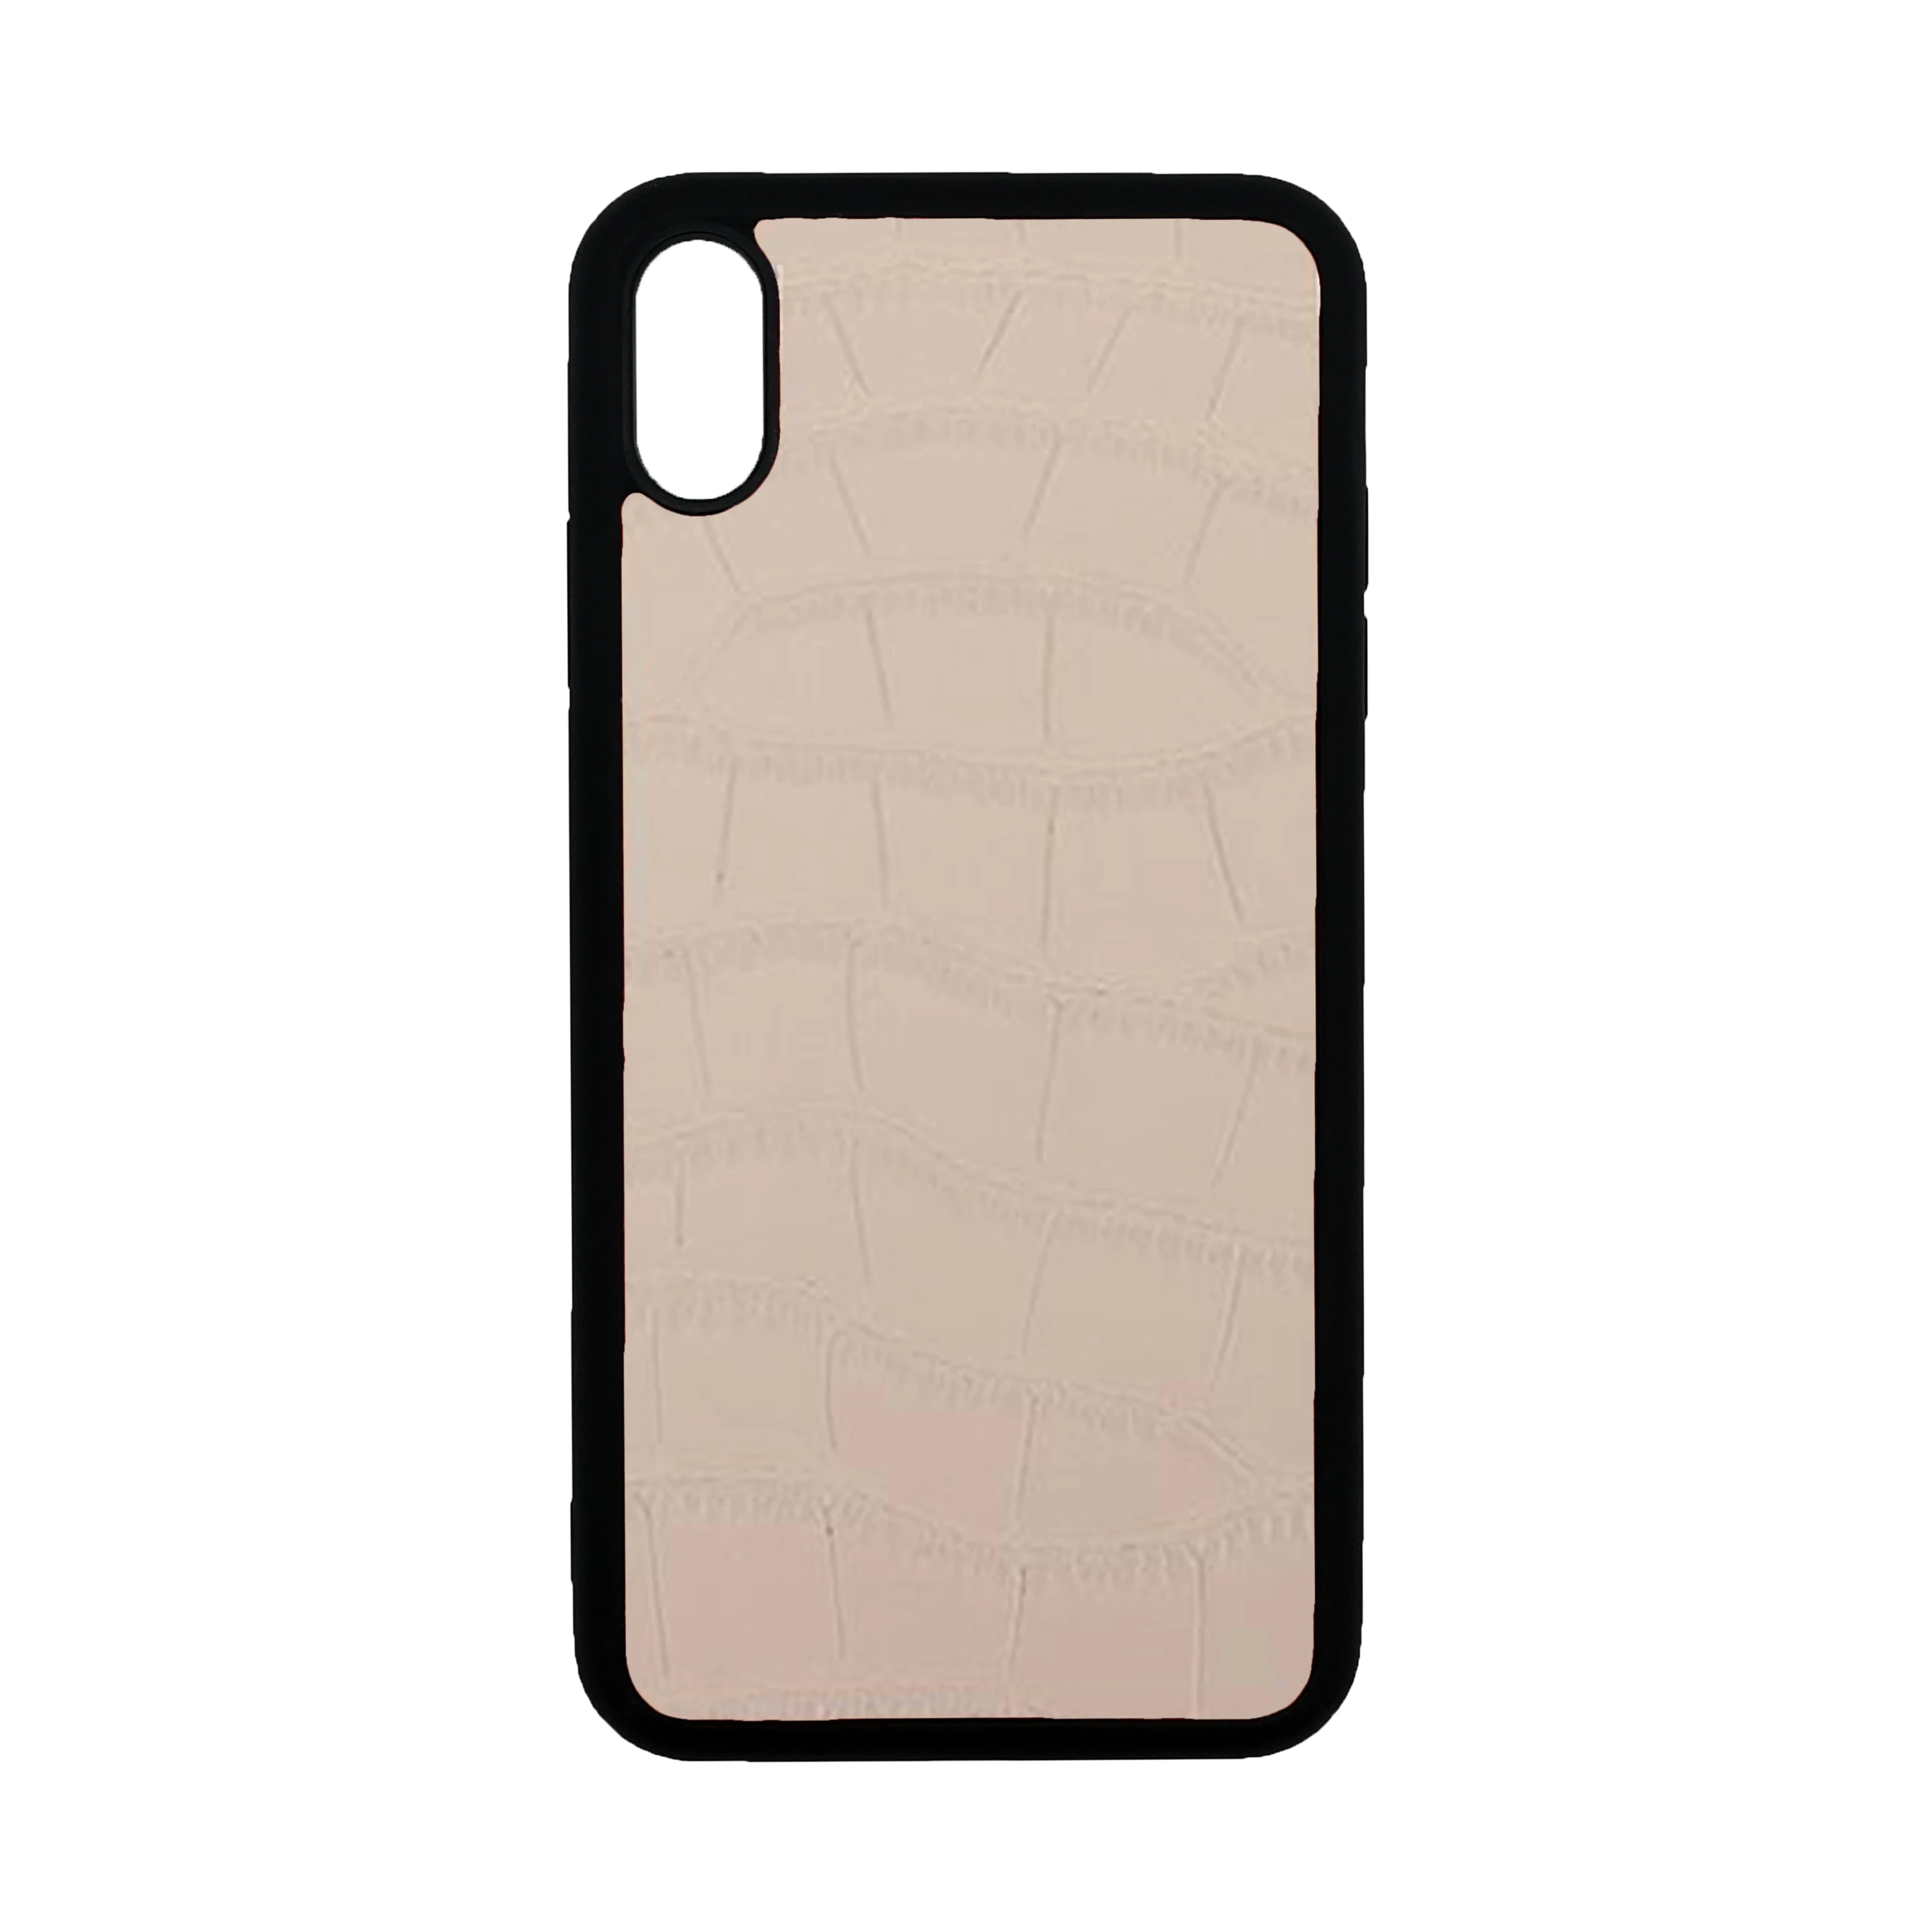 crocodile PU leather mobile phone case back cover for iPhone 11 pro max